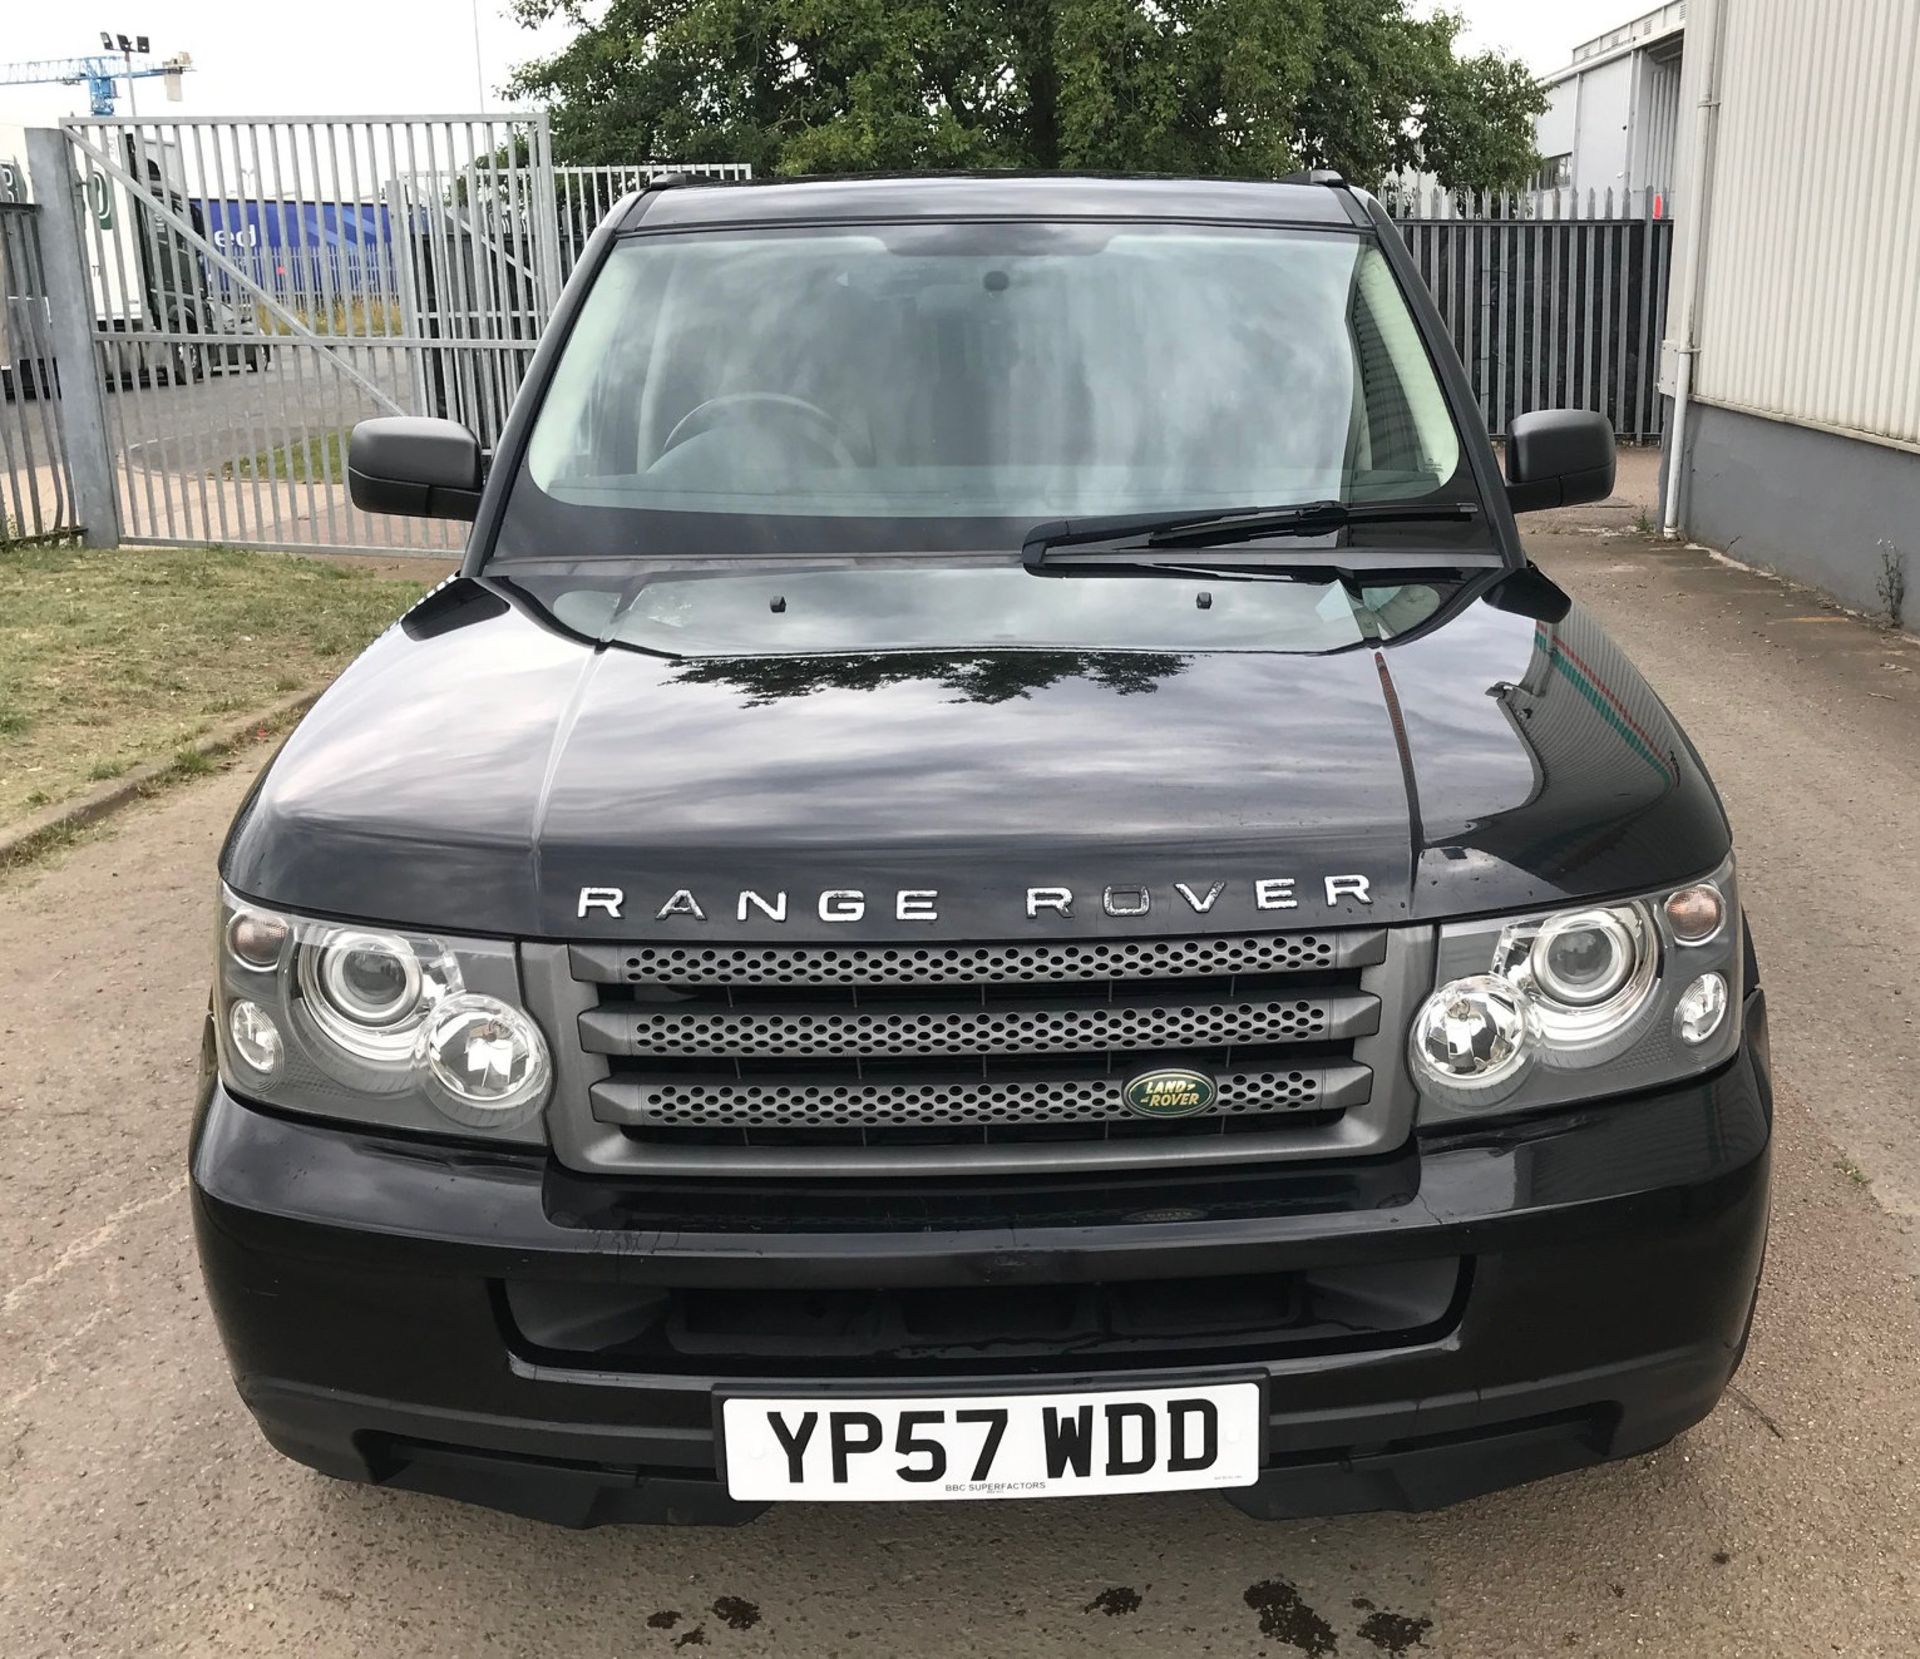 2007 Land Rover Range Rover Sport 2.7 TDV6 5Dr 4x4 - NO VAT ON THE HAMMER - Location: Corby - Image 2 of 15